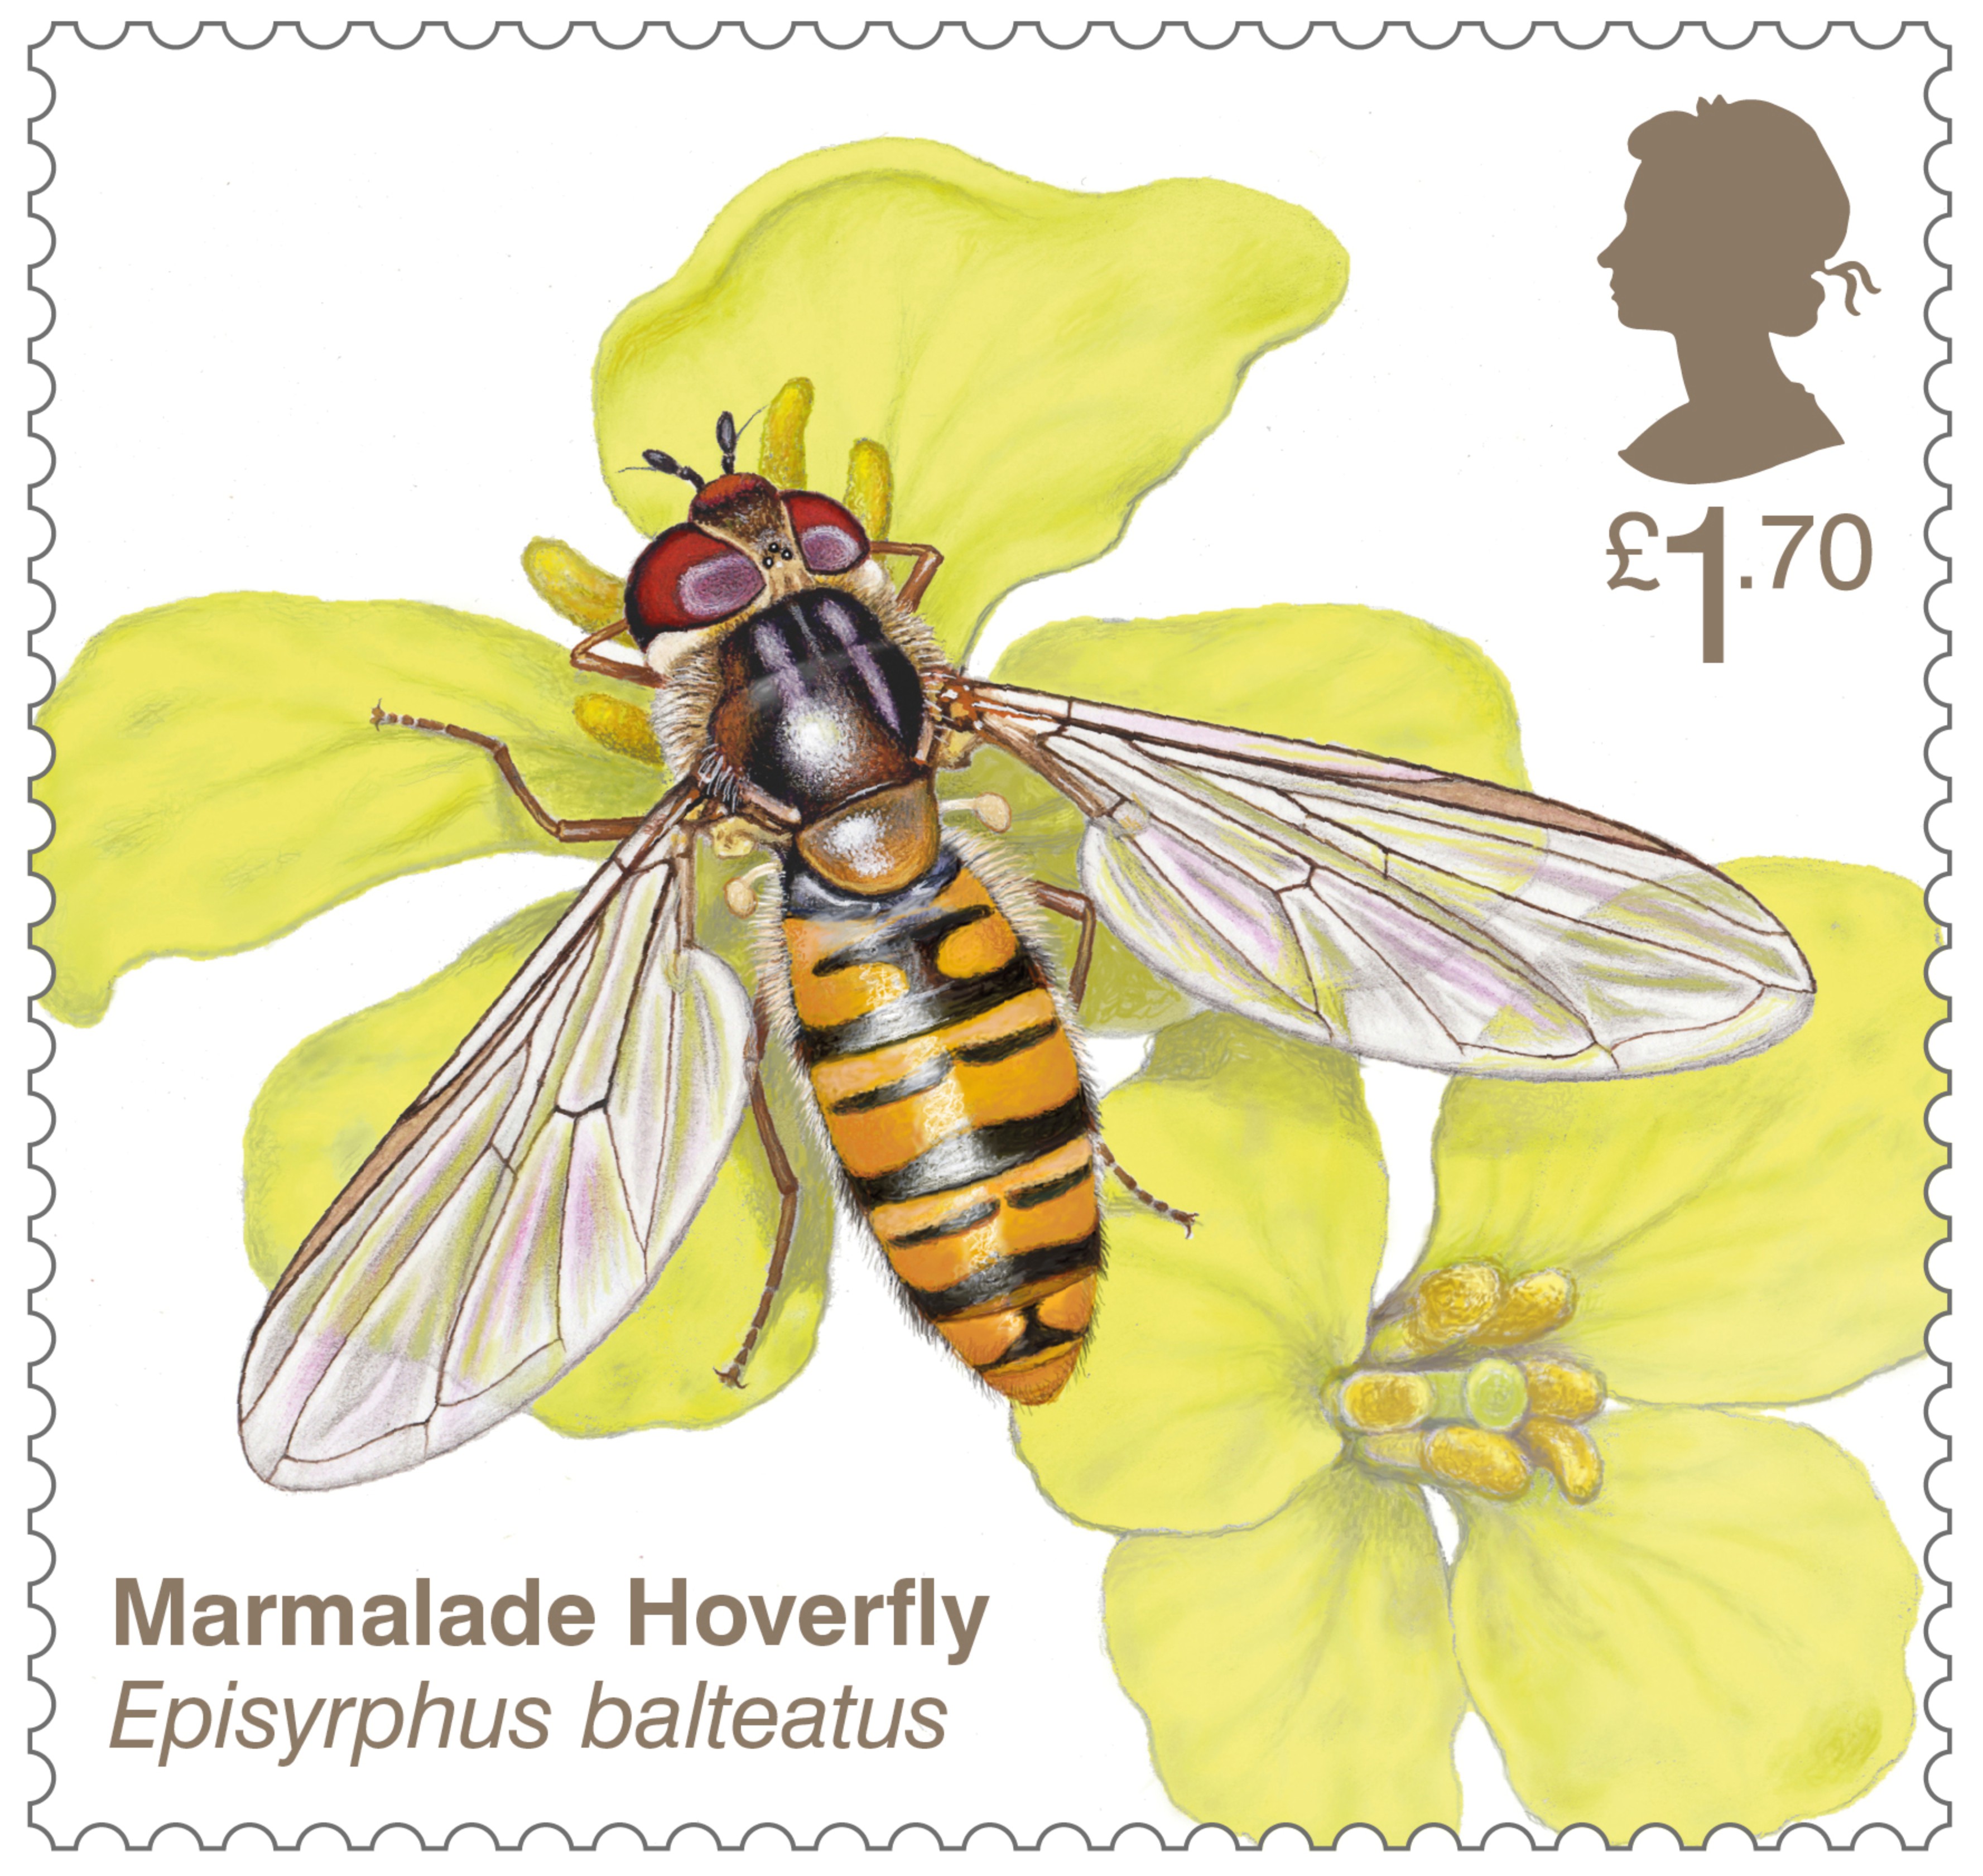 Marmalade hoverfly stamp